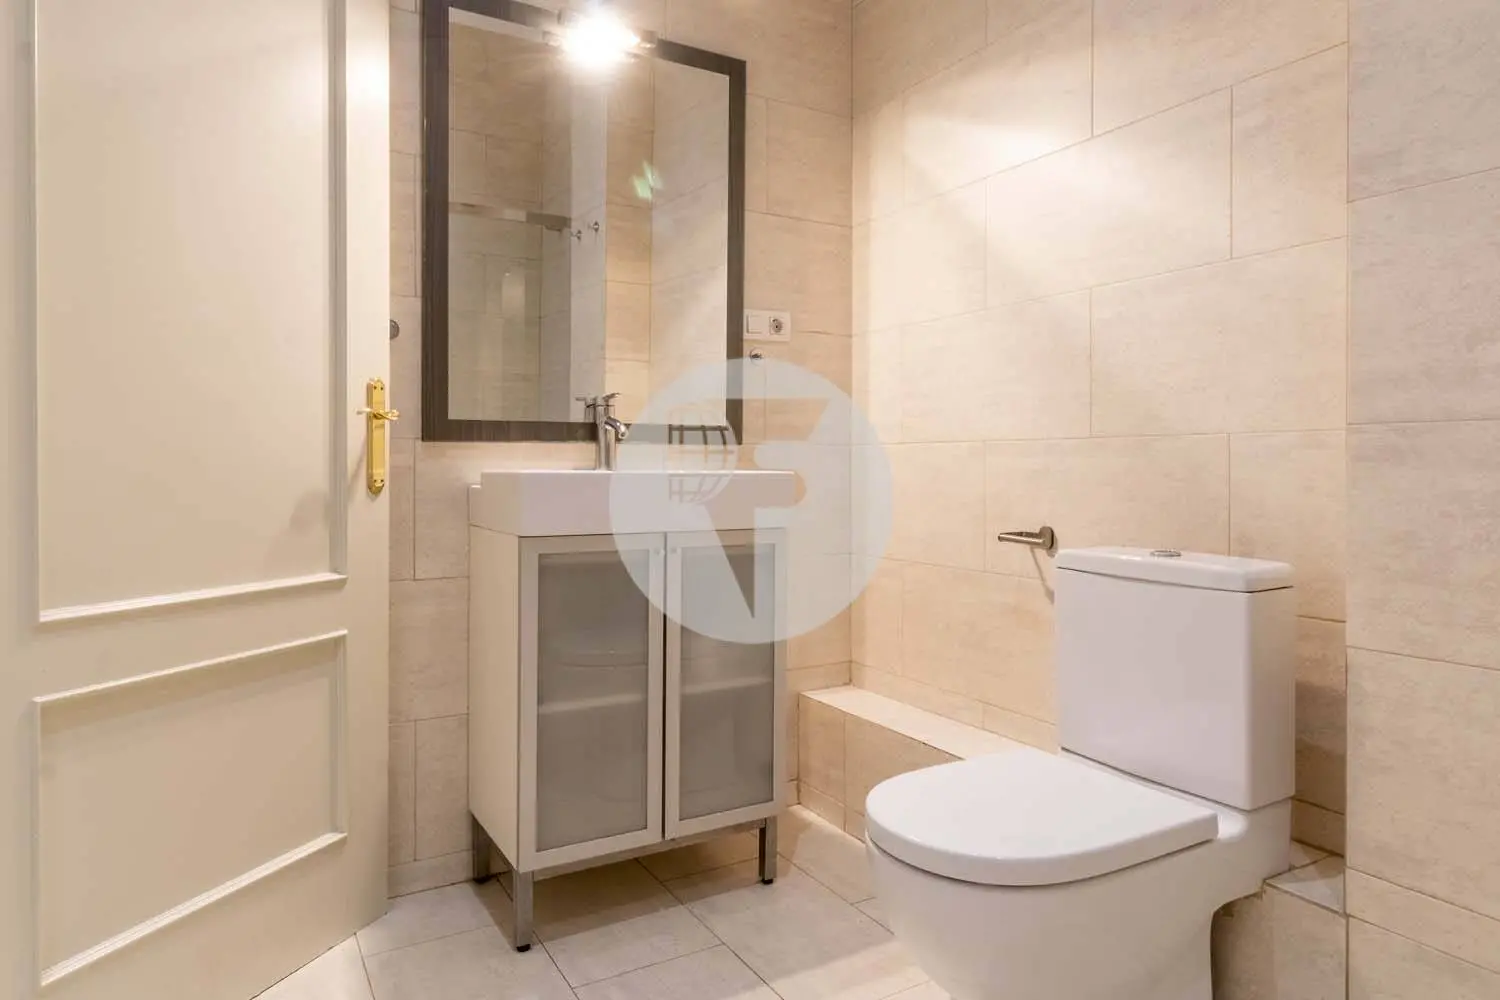 Furnished and equipped on Rosselló Street 20